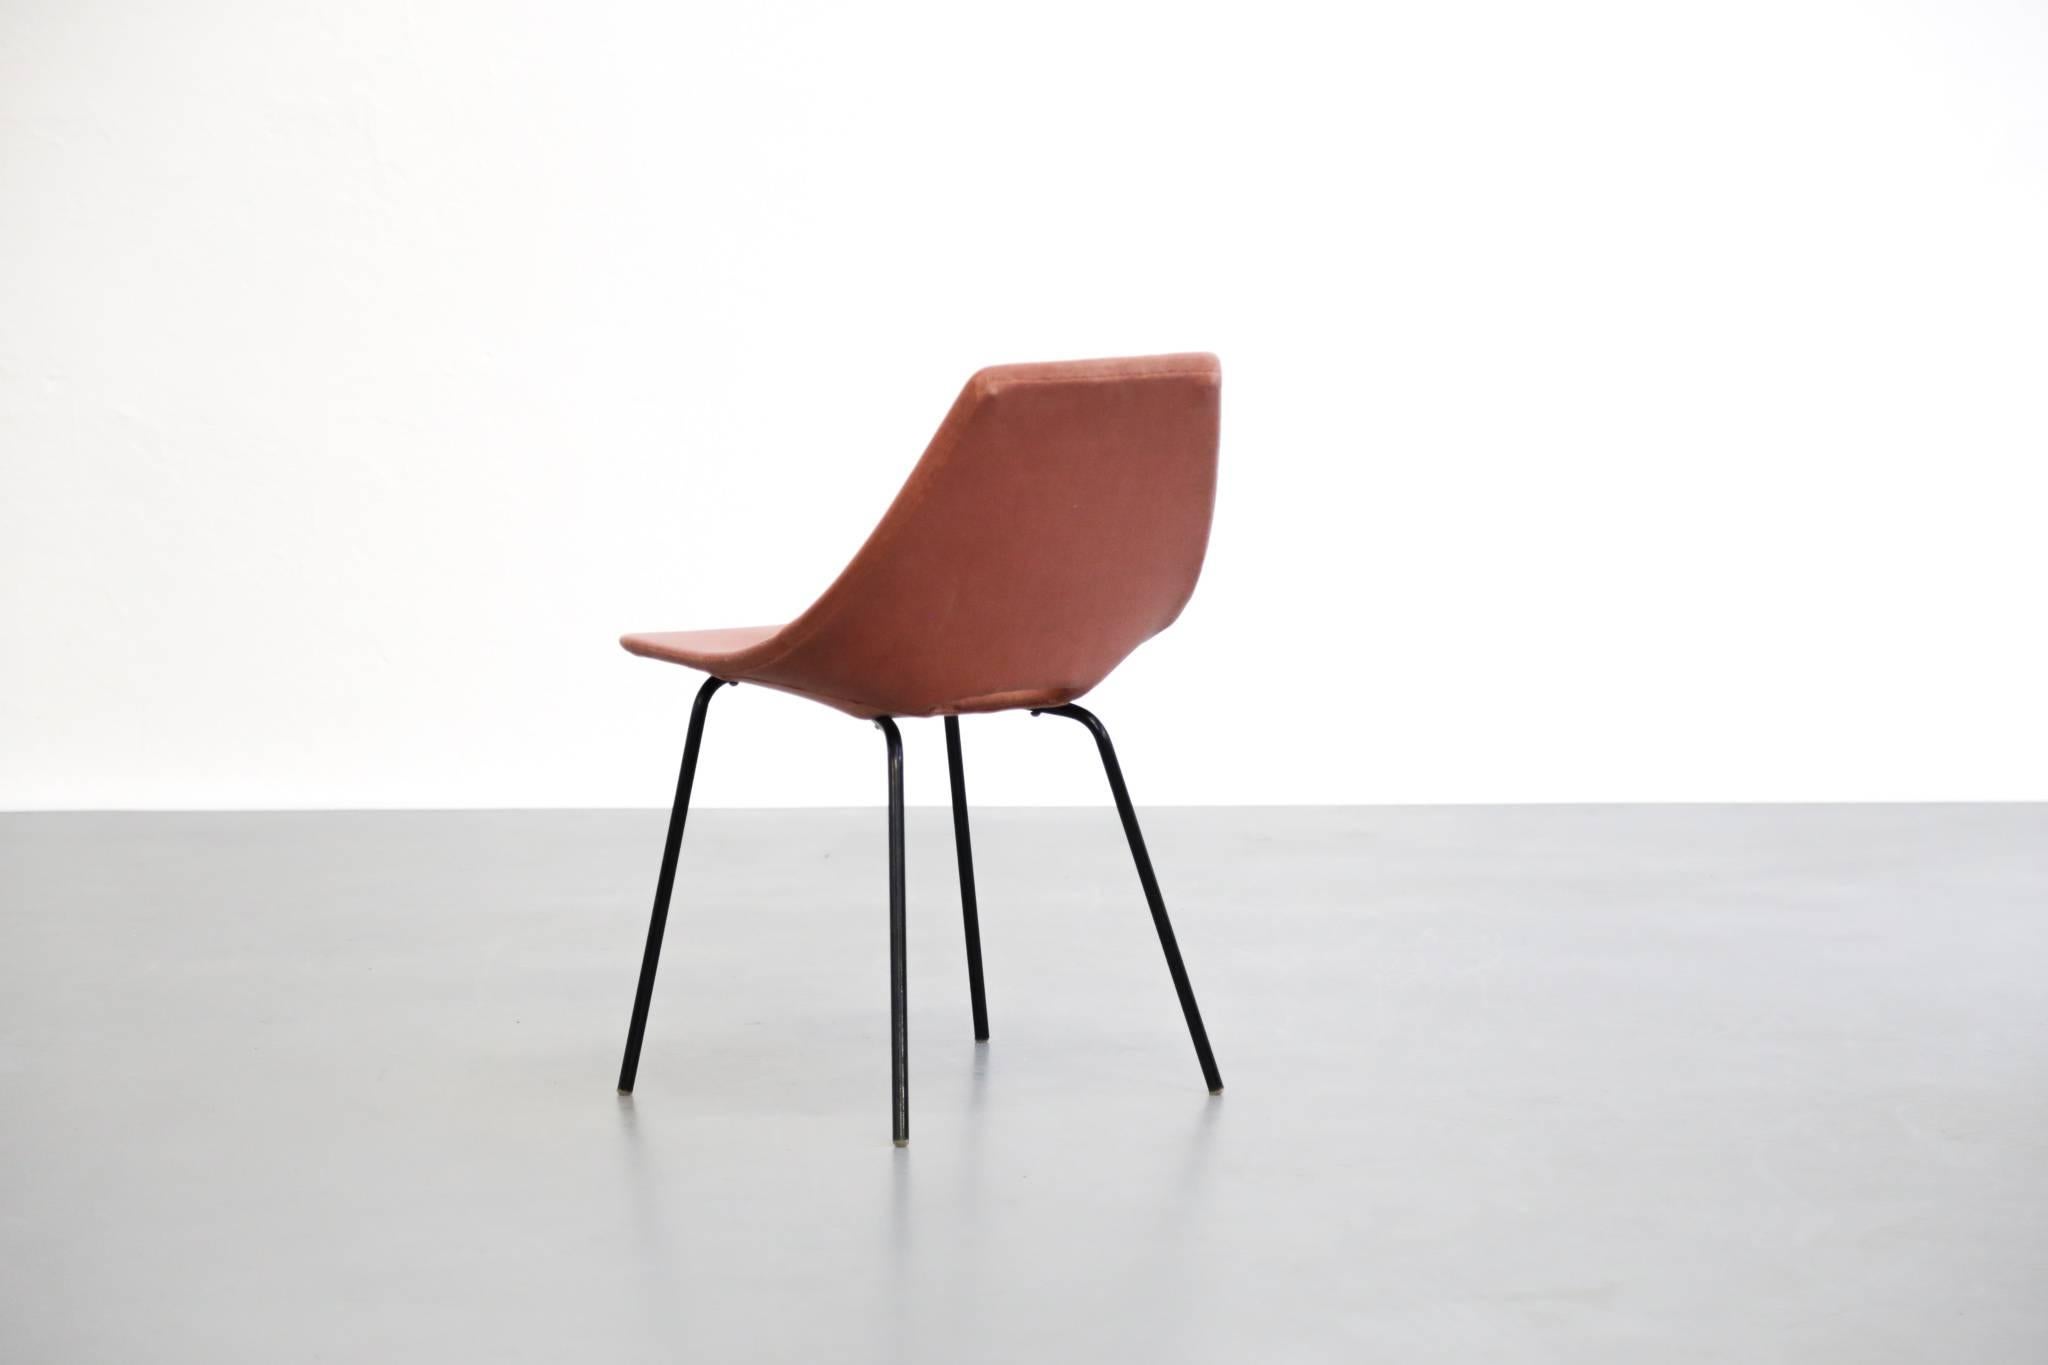 French Tonneau Chair by Pierre Guariche for Steiner